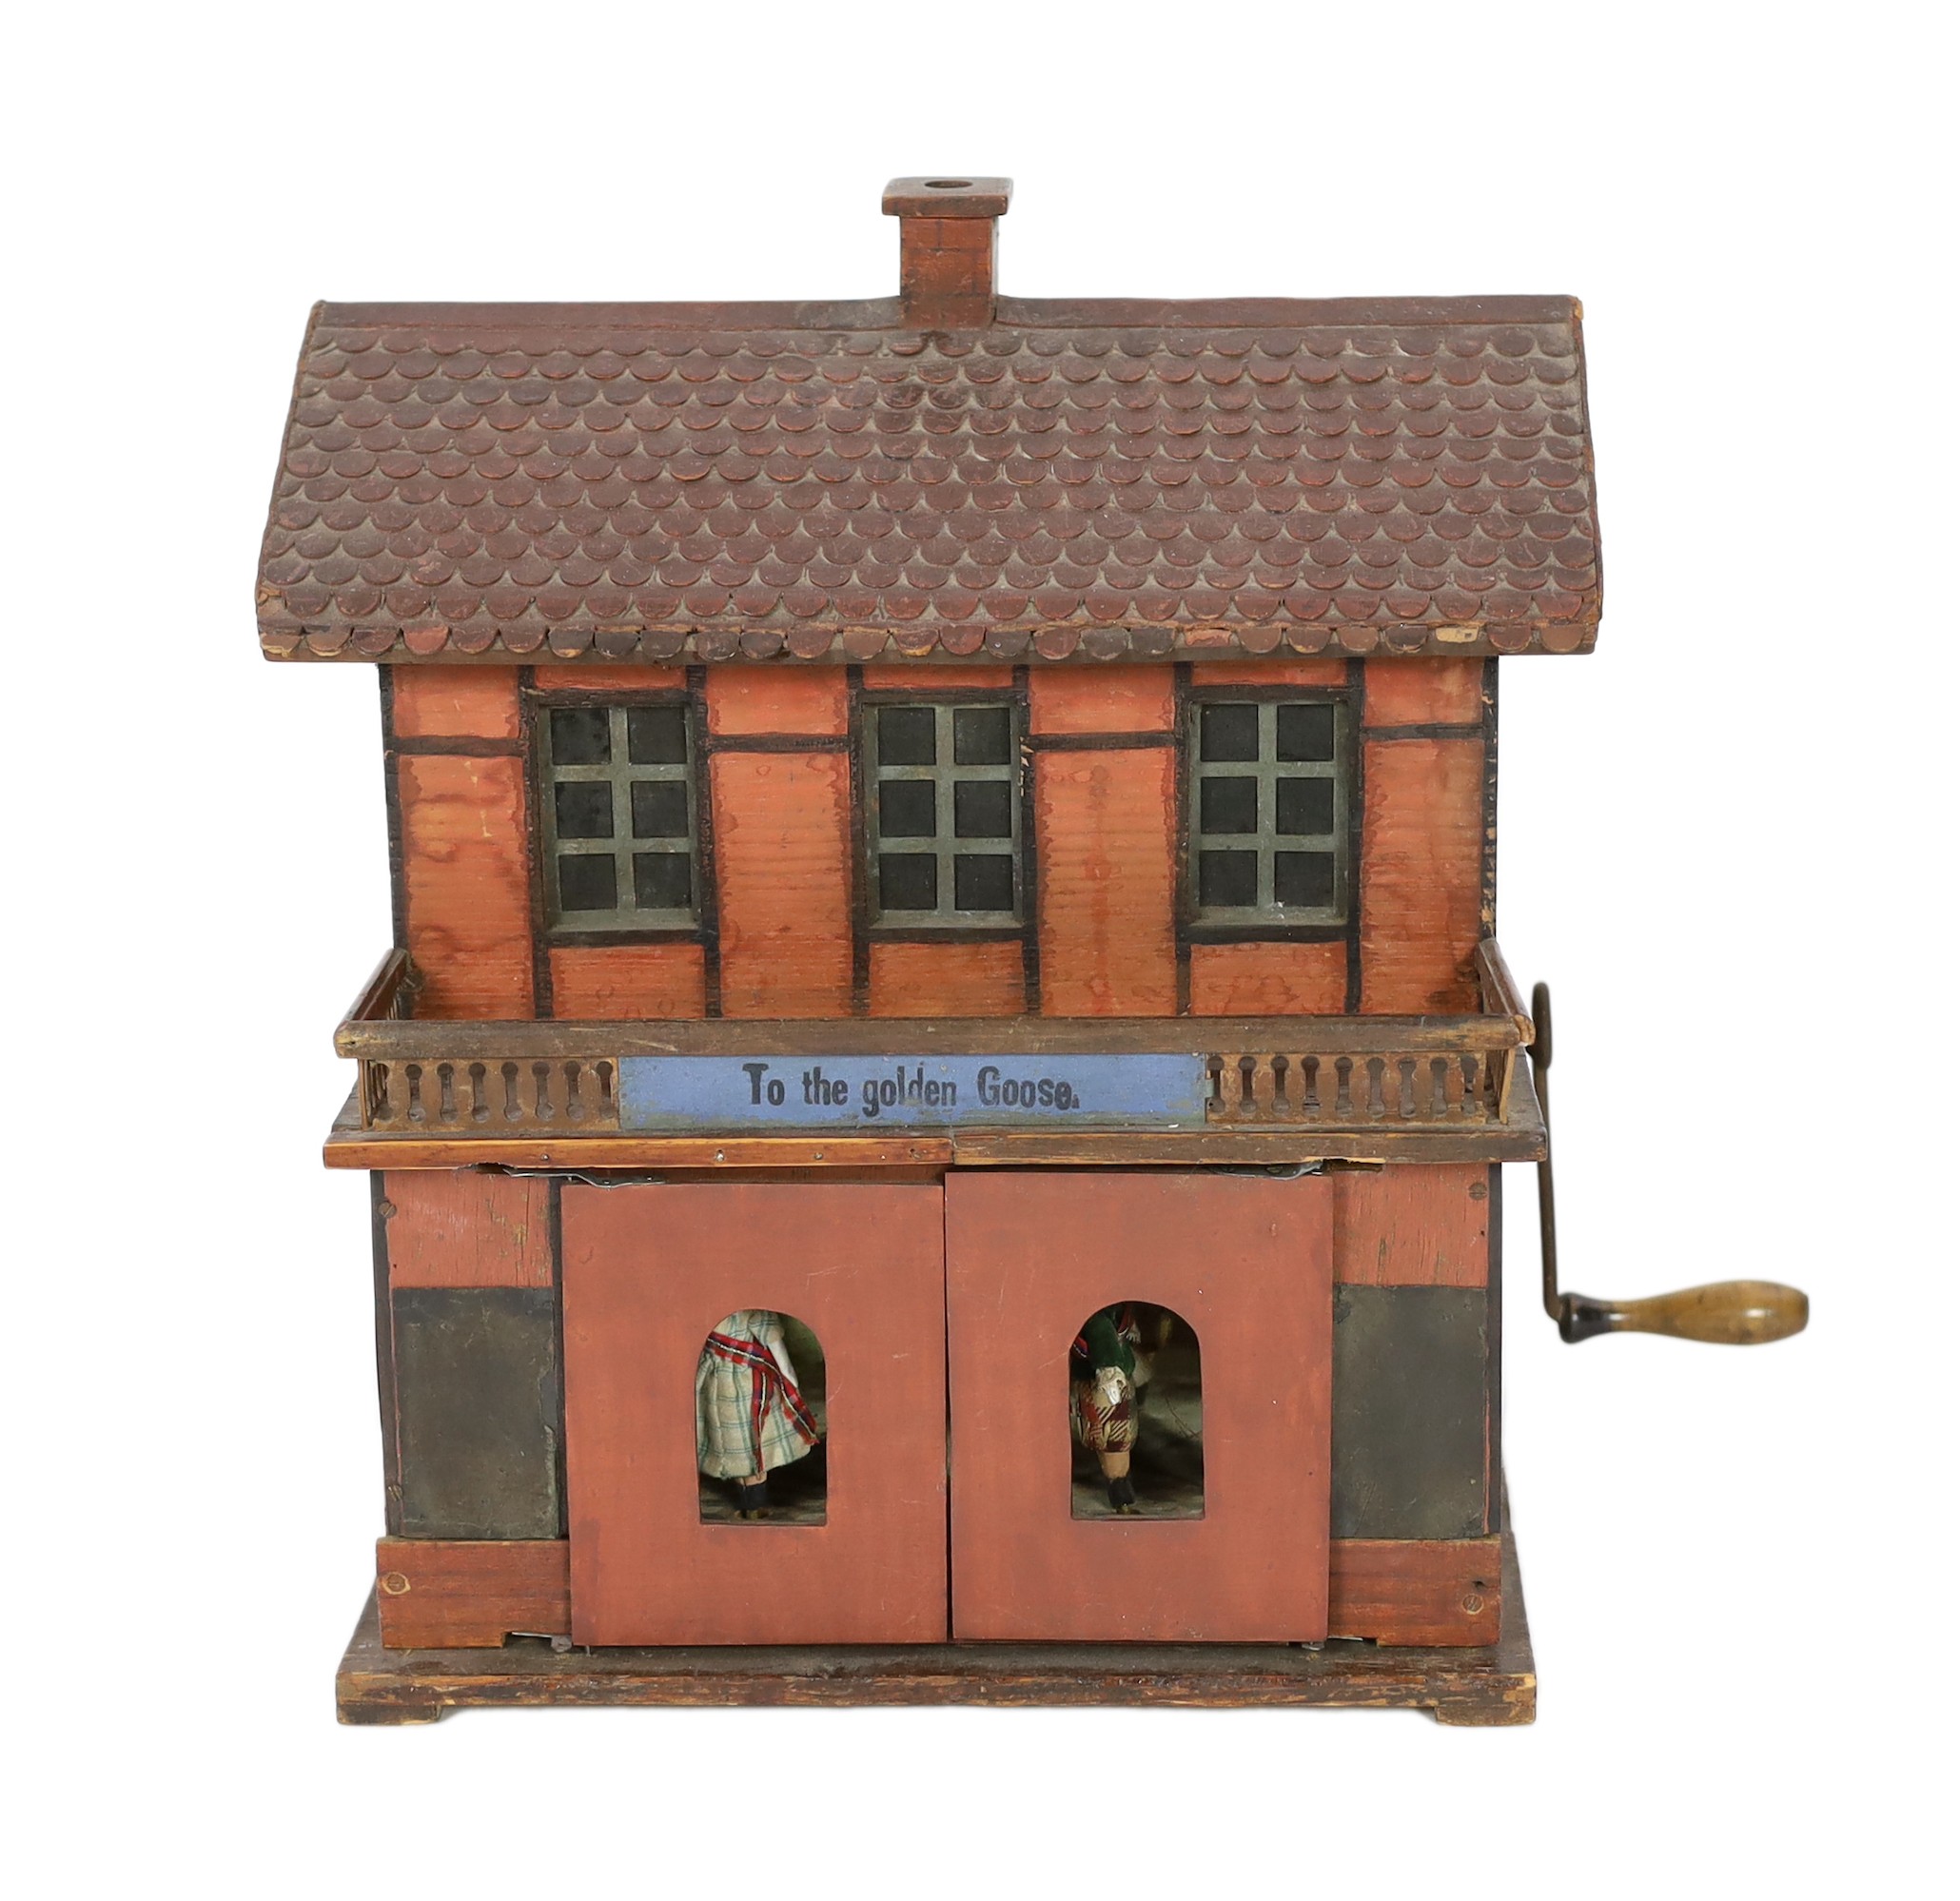 ‘To The Golden Goose’: A rare German musical toy modelled as two storey half-timbered building, circa 1890, 39cm high                                                                                                       